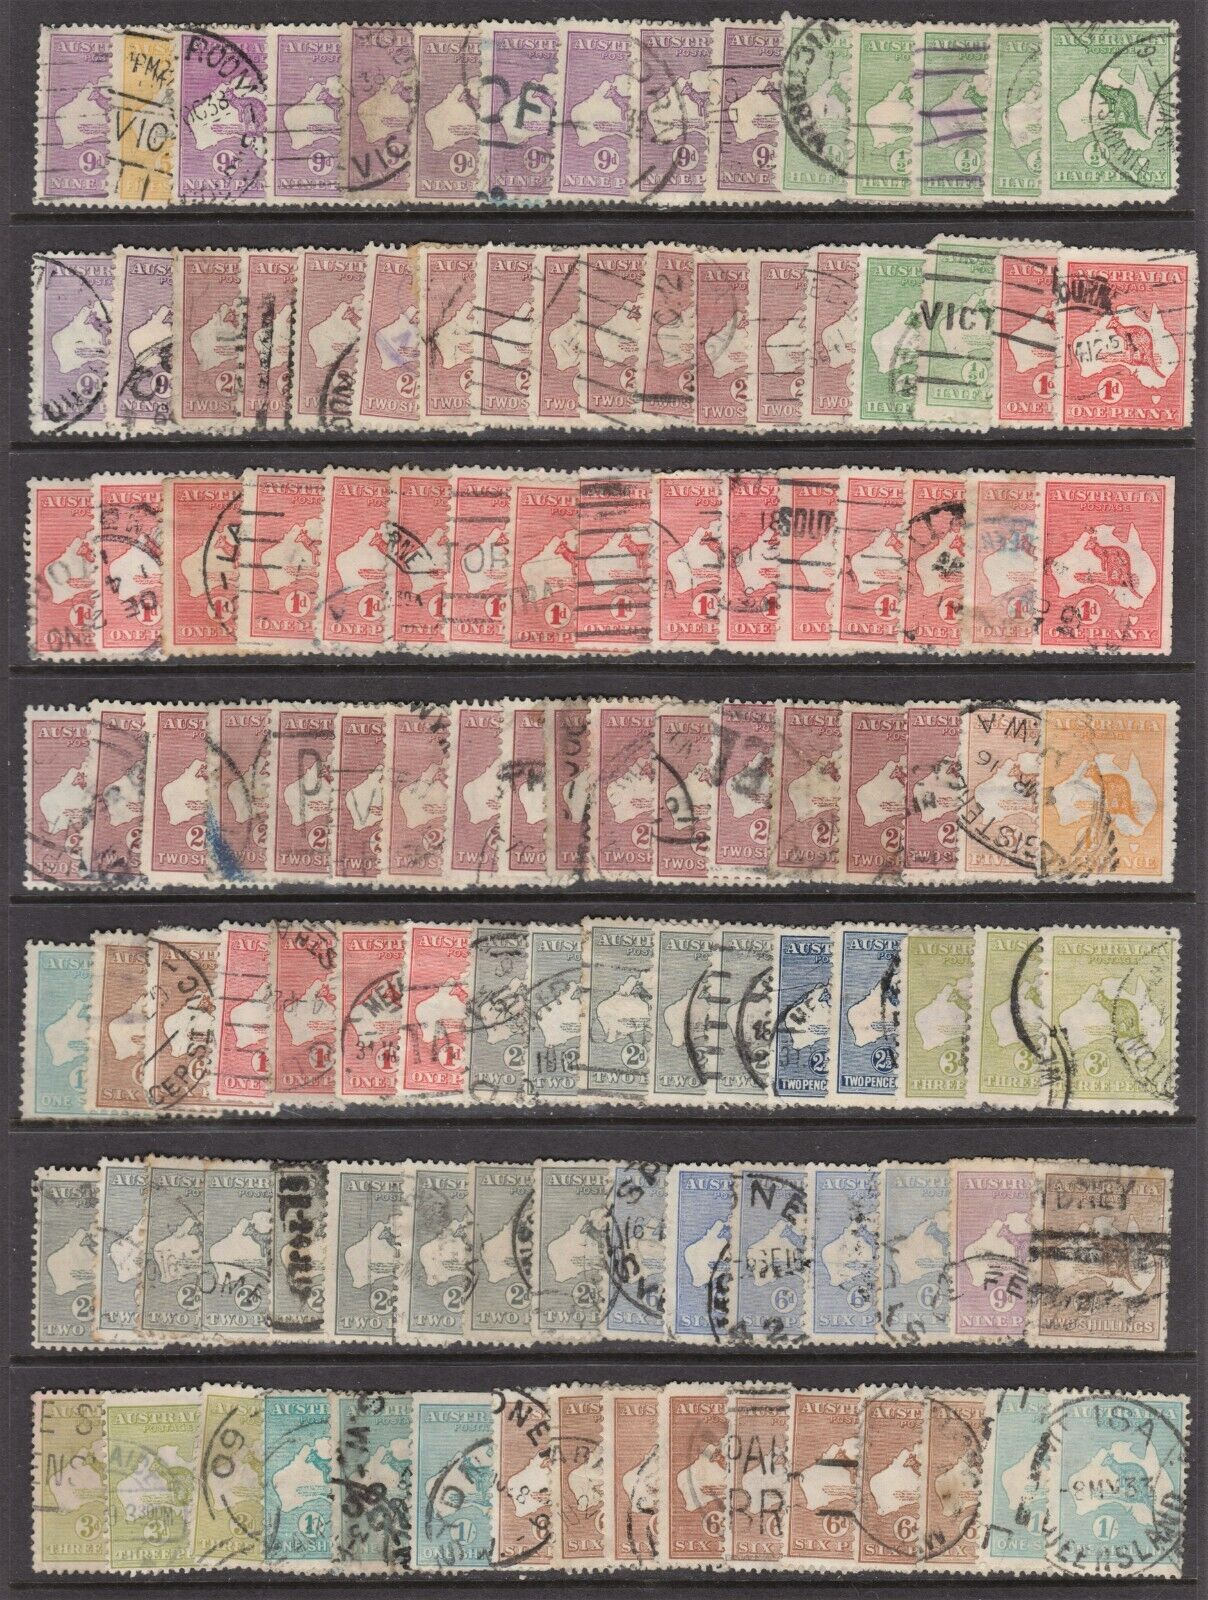 Australia Over 100 Used Kangaroos - Different Watermarks To 5s Value All Seconds